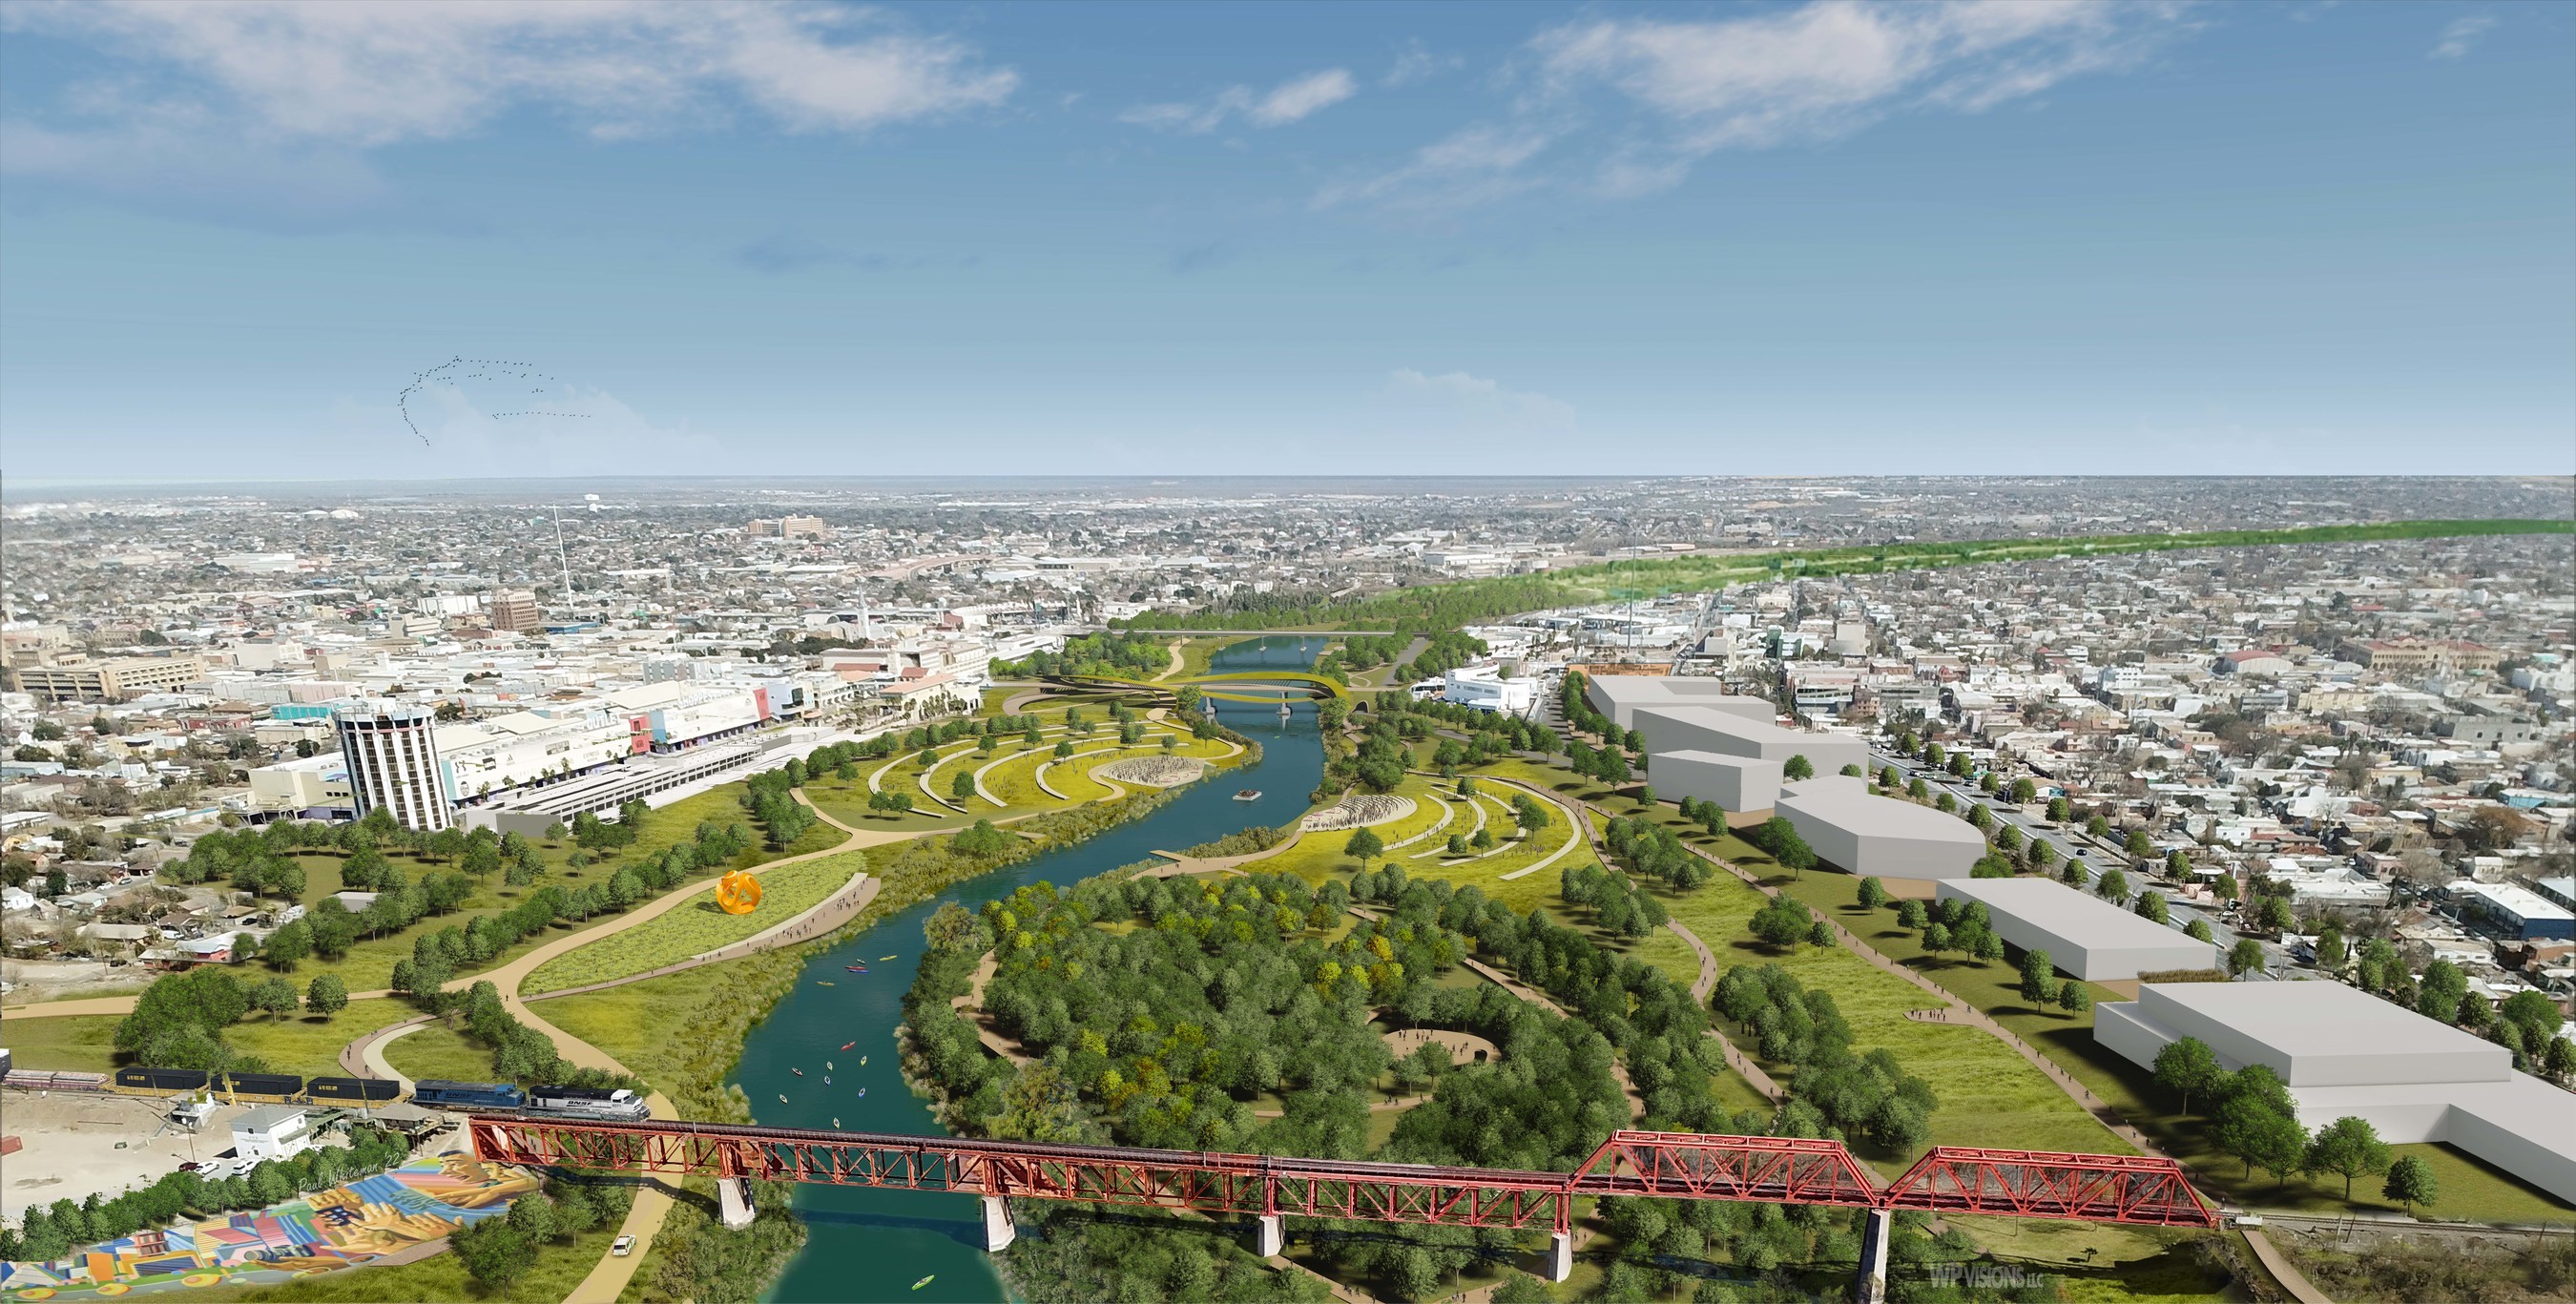 Overland Partners with local associate Able City, were unanimously chosen by Laredo City Council and members of the Binational Working Group, a public-private consortium, to conceptualise this binational river park project.  Courtesy of Overland Partners Architects.